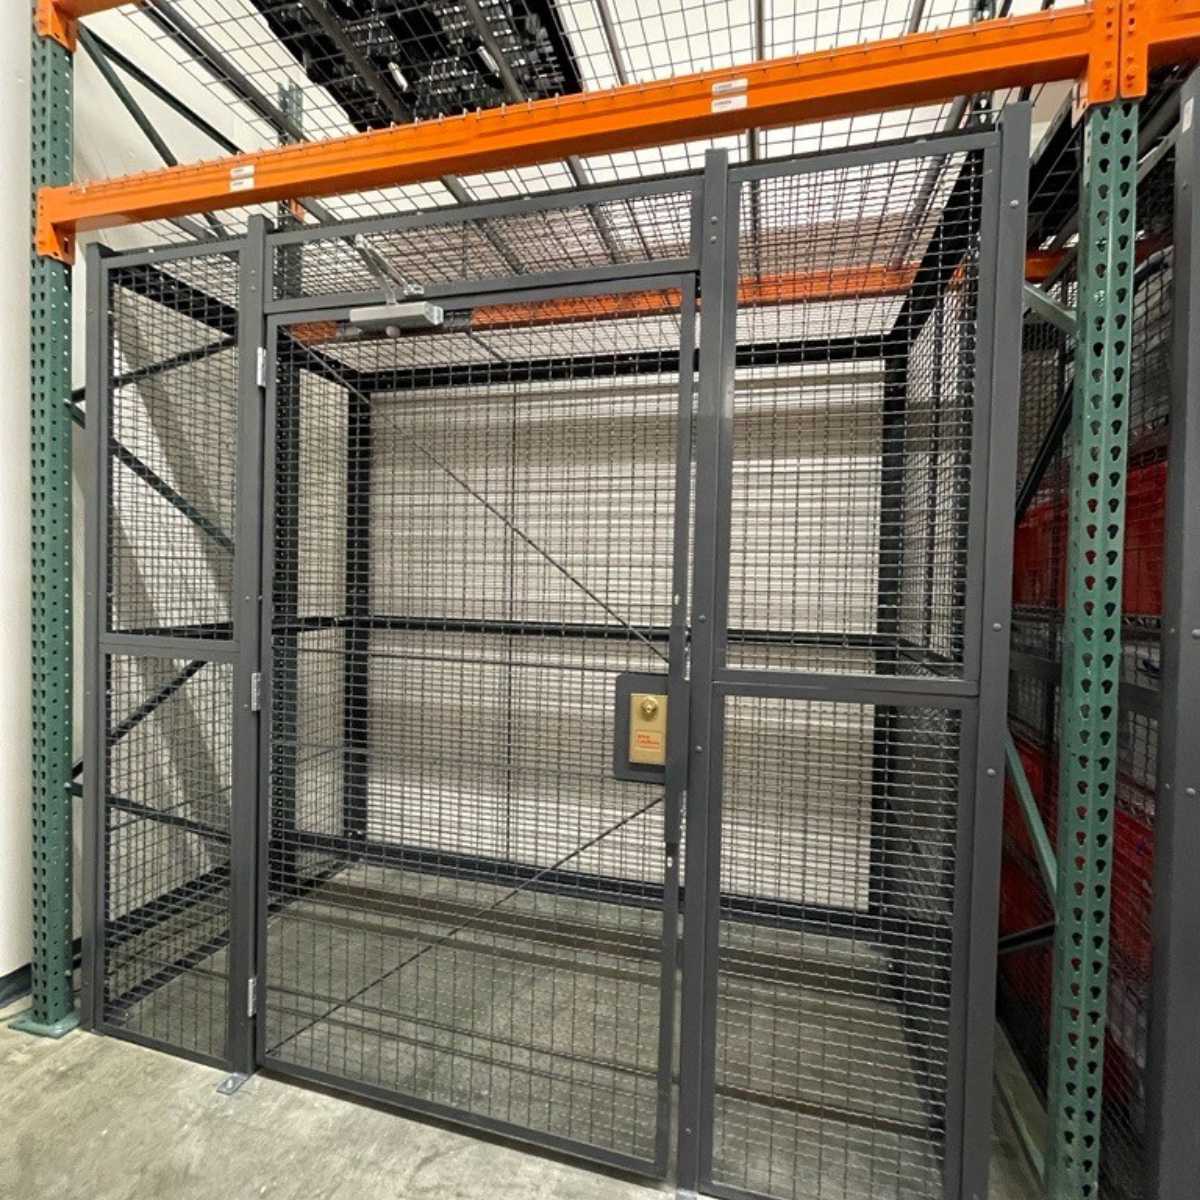 gray mesh cage with lockable security door and orange ceiling joists